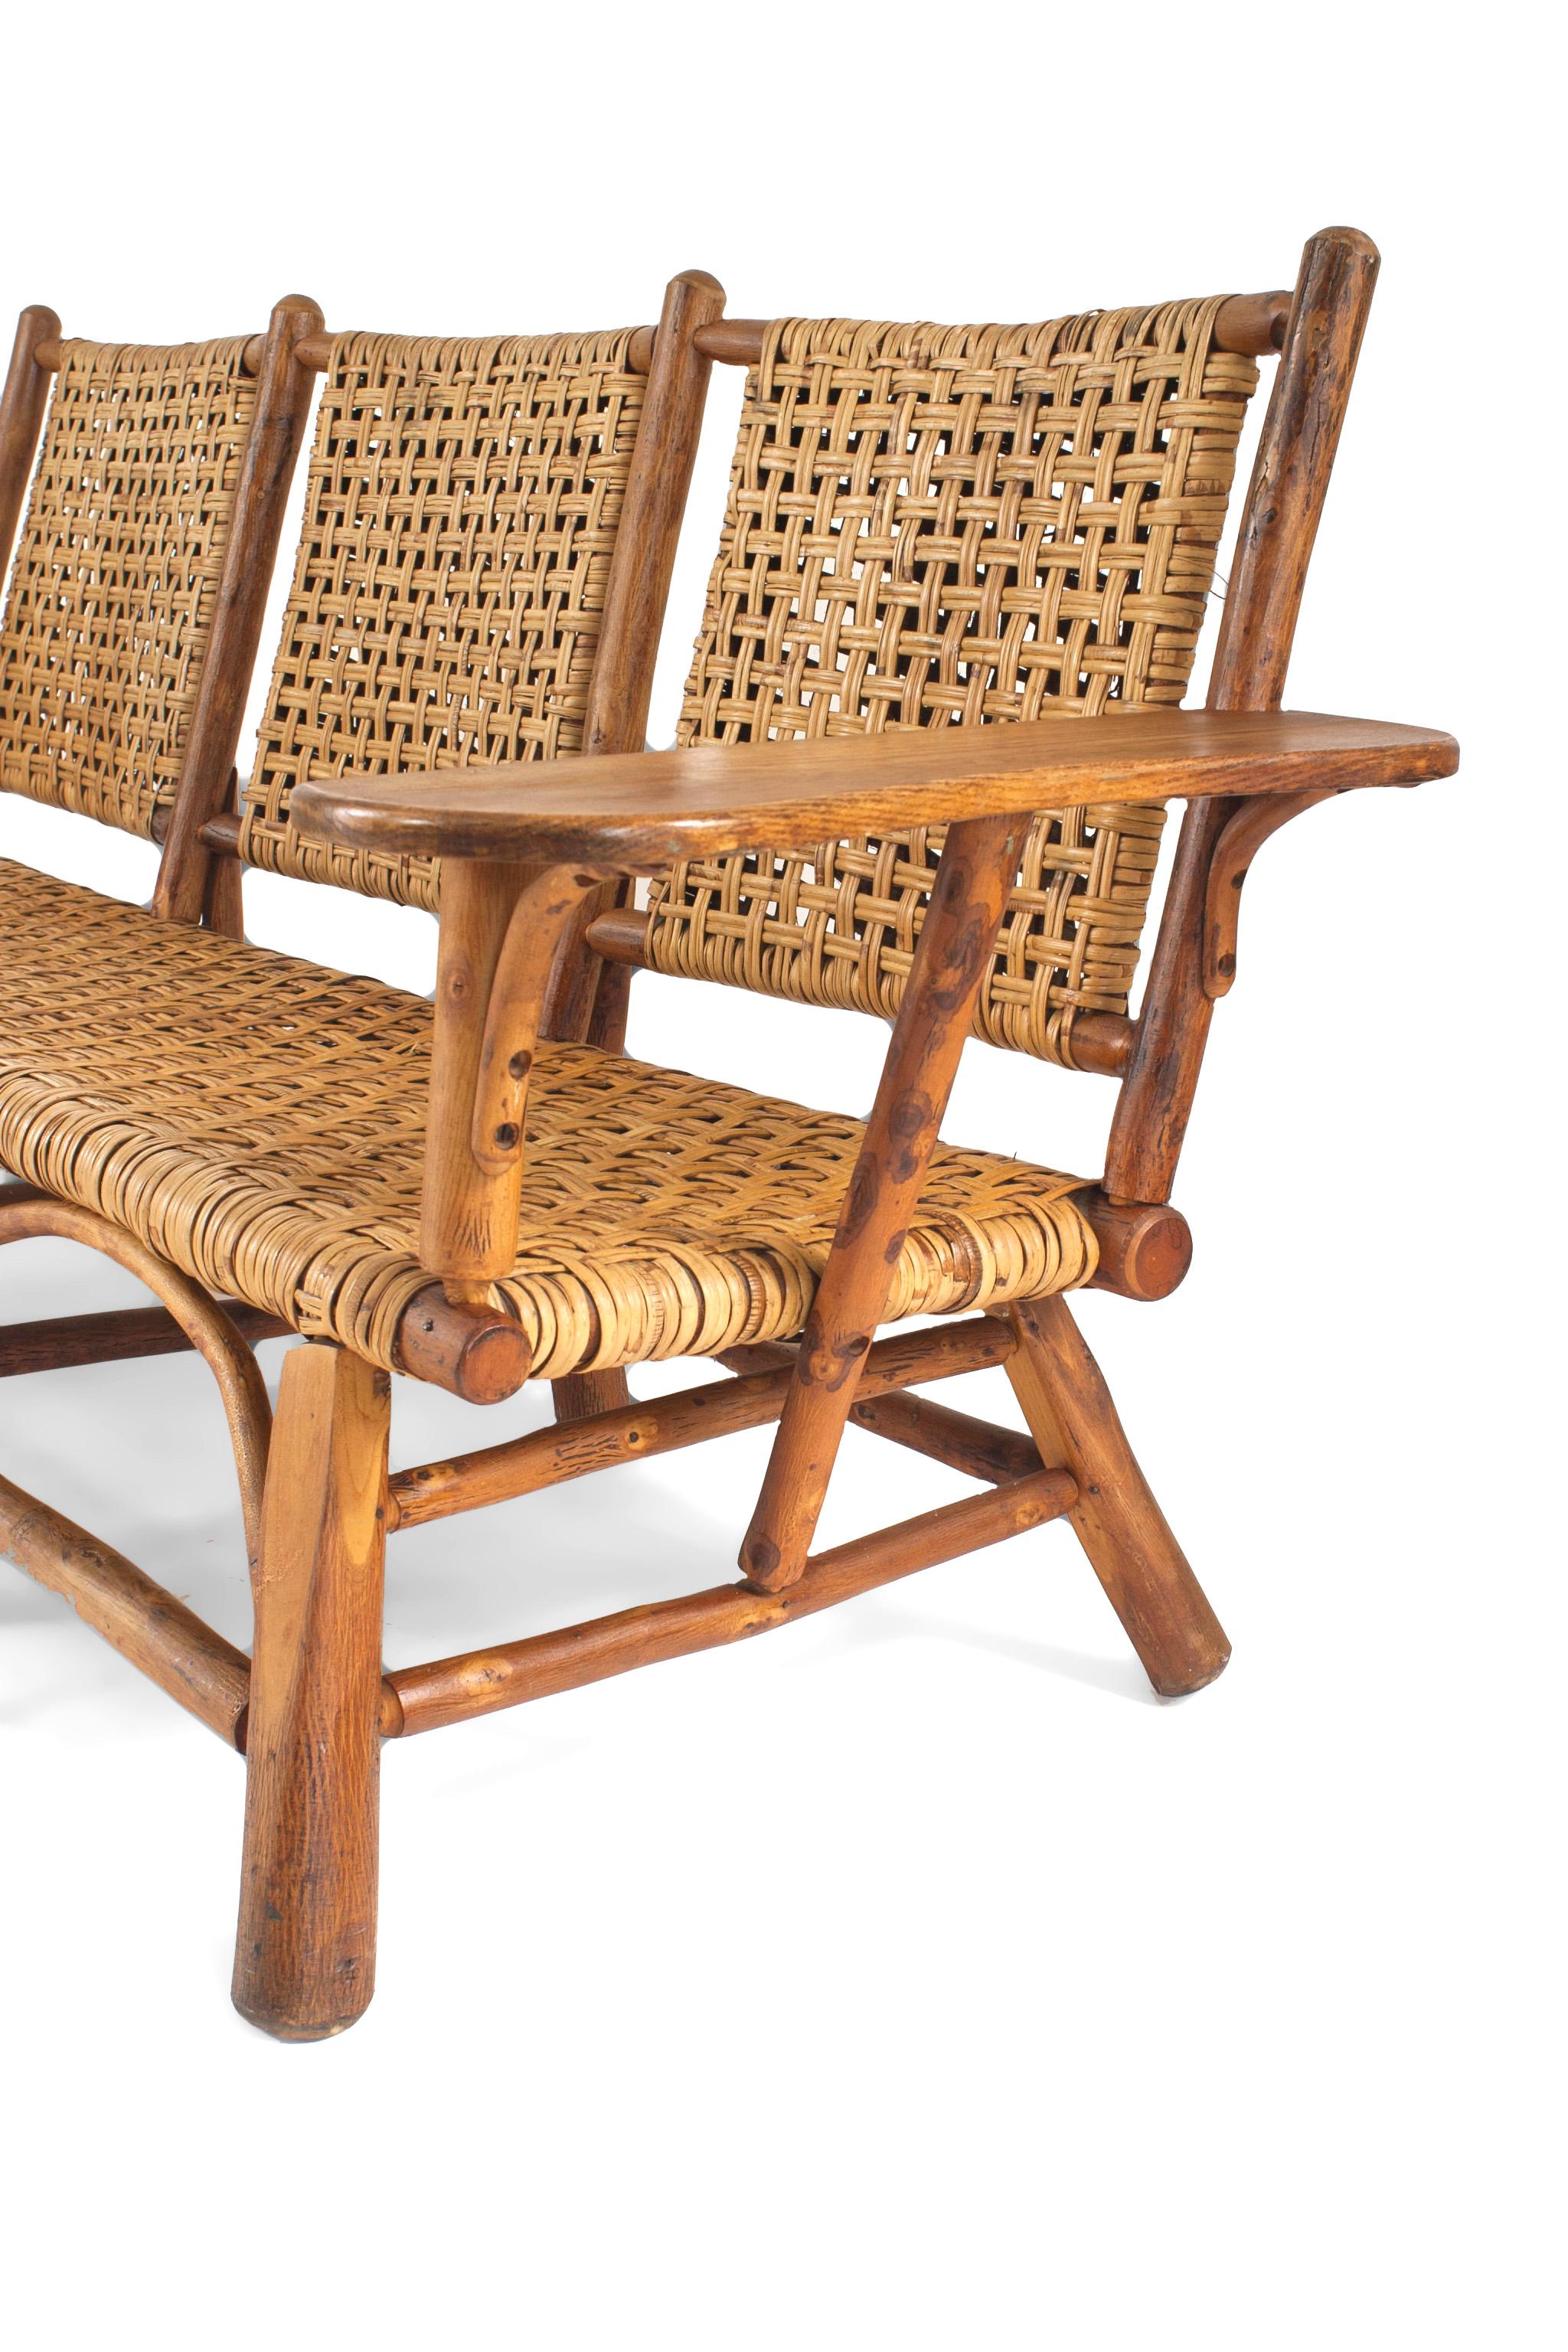 Rustic Old Hickory settee with woven seat and back oak plank armrests. See matching armchairs; dealer reference number 061005B.


Since 1899 Old Hickory Furniture has been handcrafted in Central Indiana using the remarkable hickory sapling and other